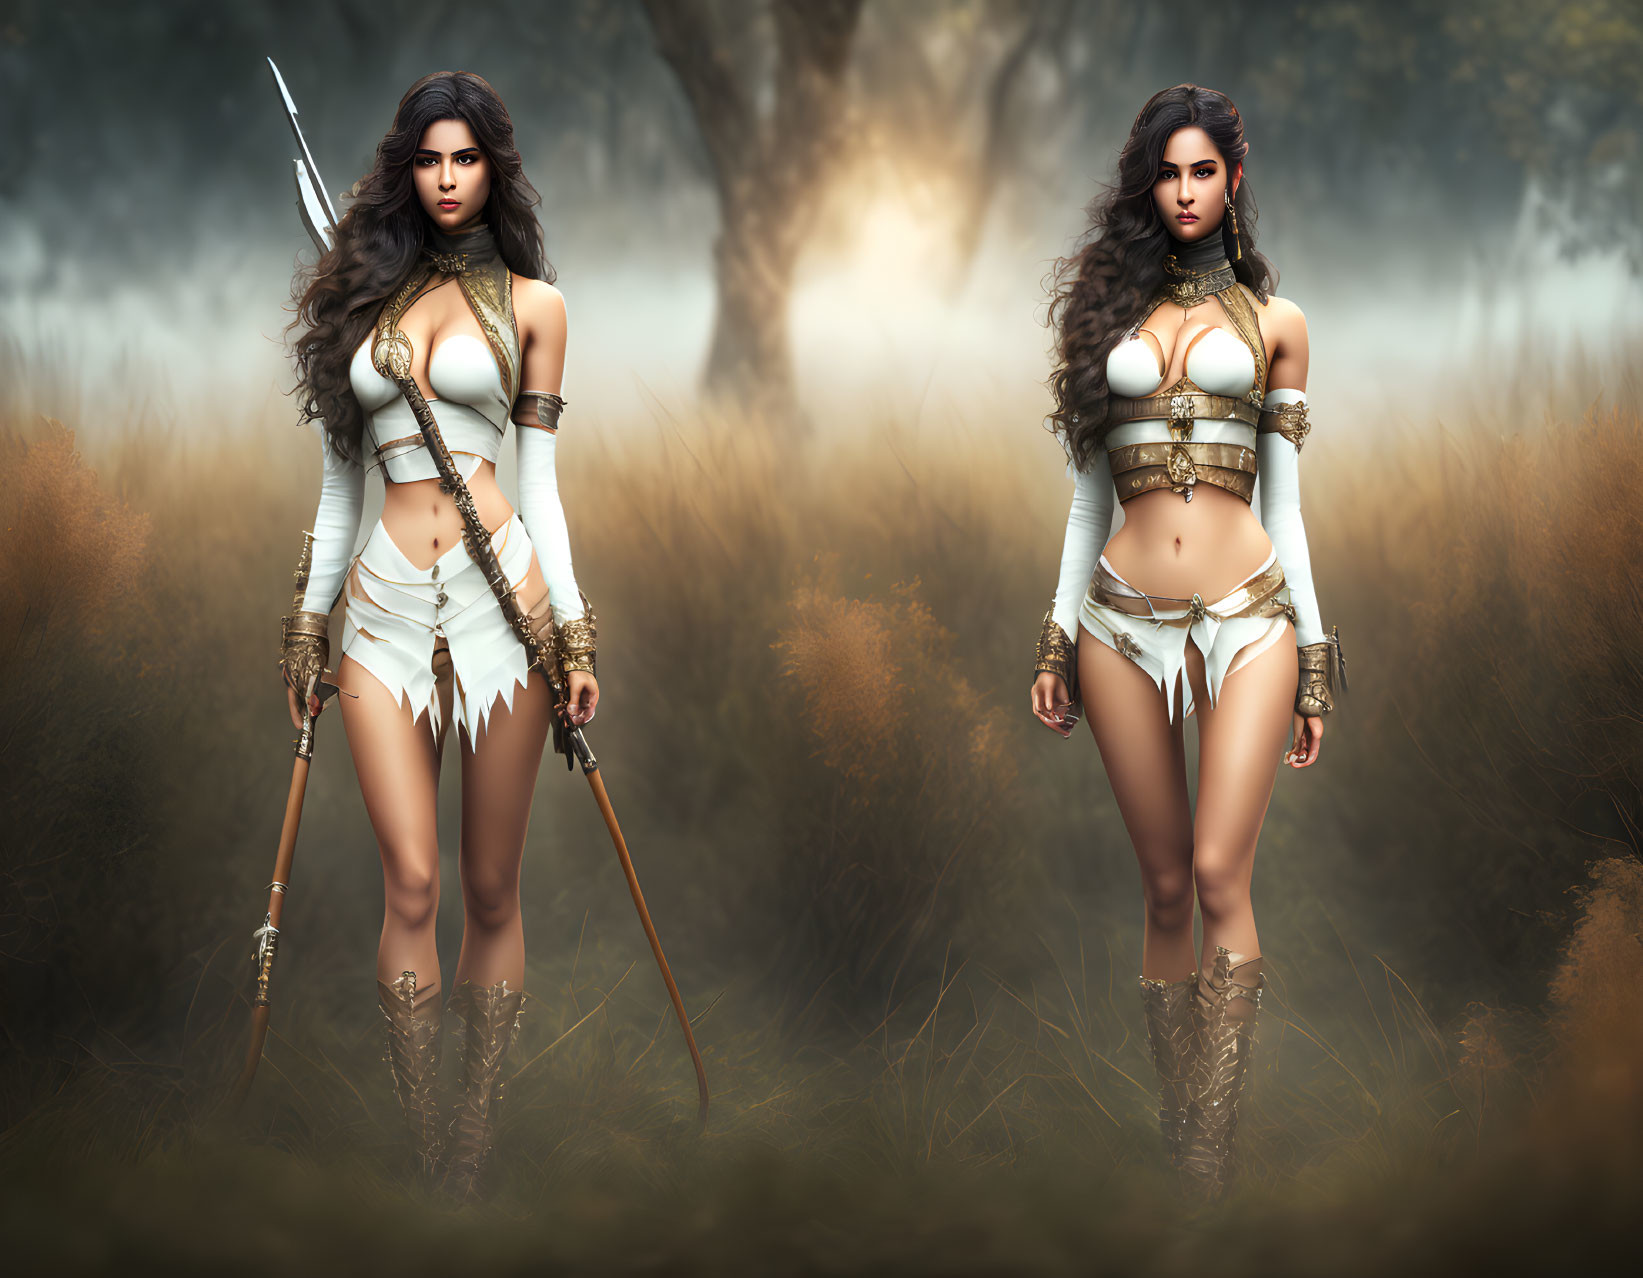 Digital artwork: Twin female warriors in misty forest with spears